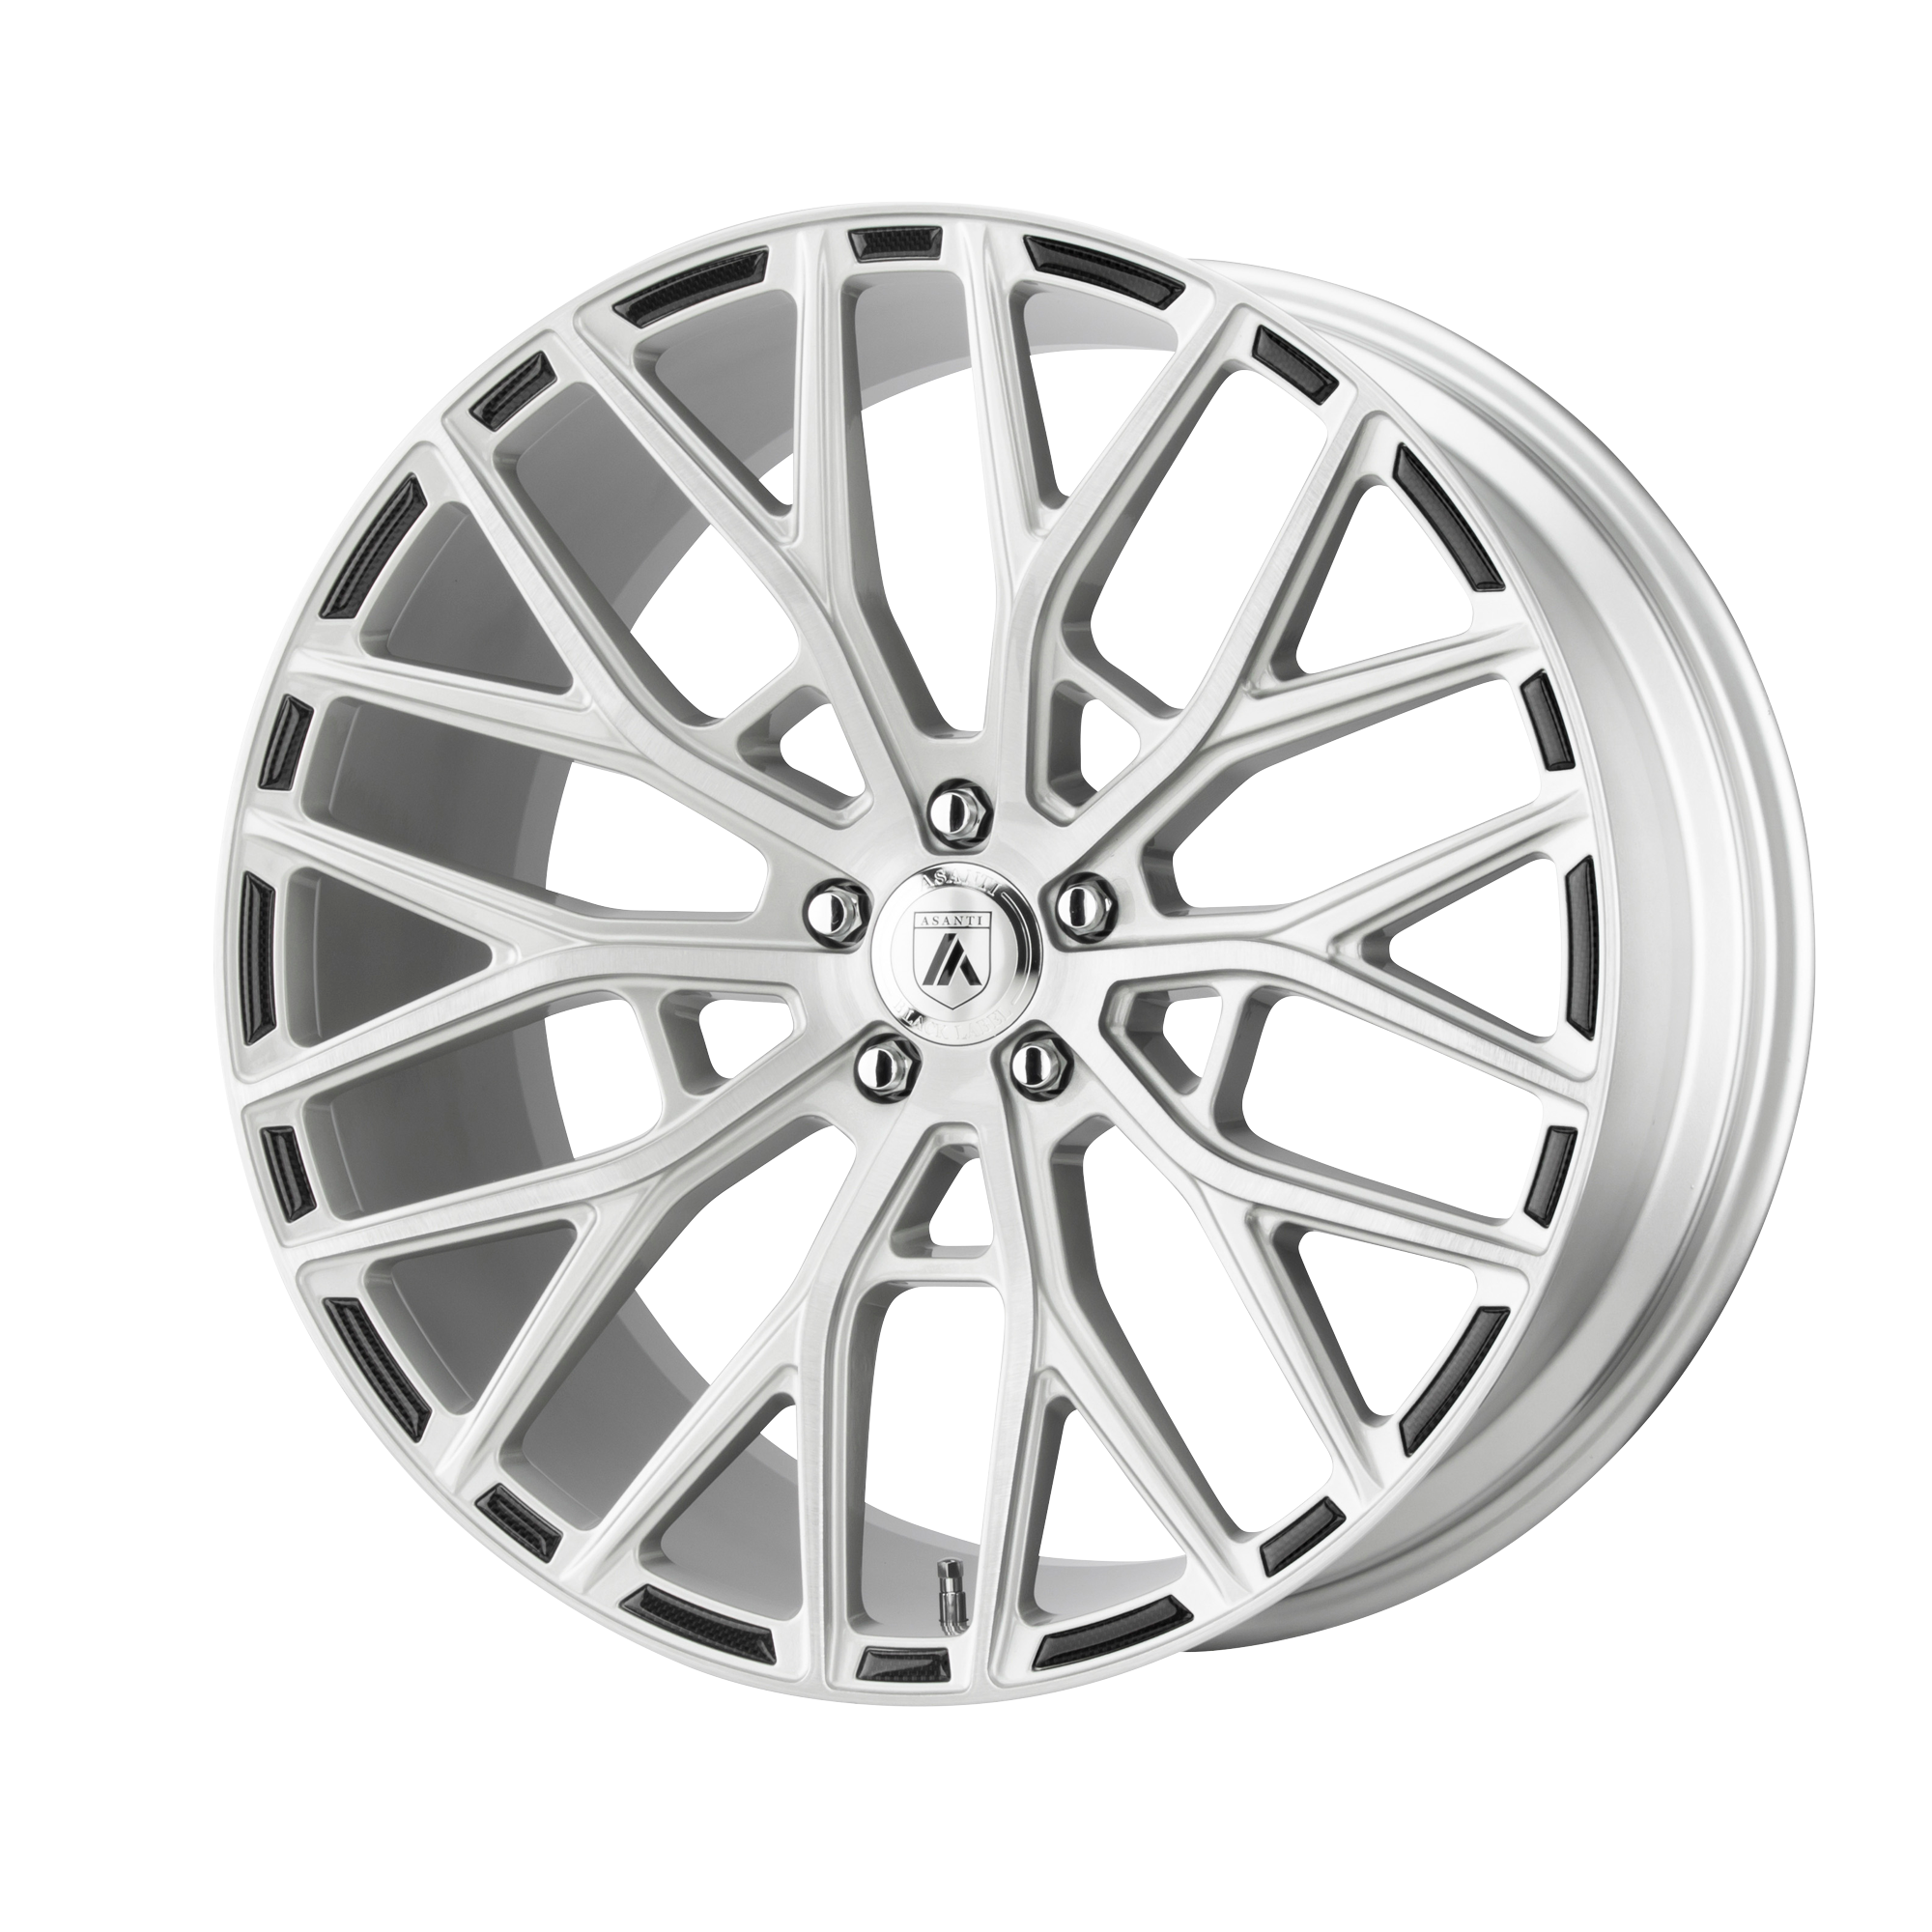 LEO 20x9 5x120.00 BRUSHED SILVER (35 mm) - Tires and Engine Performance